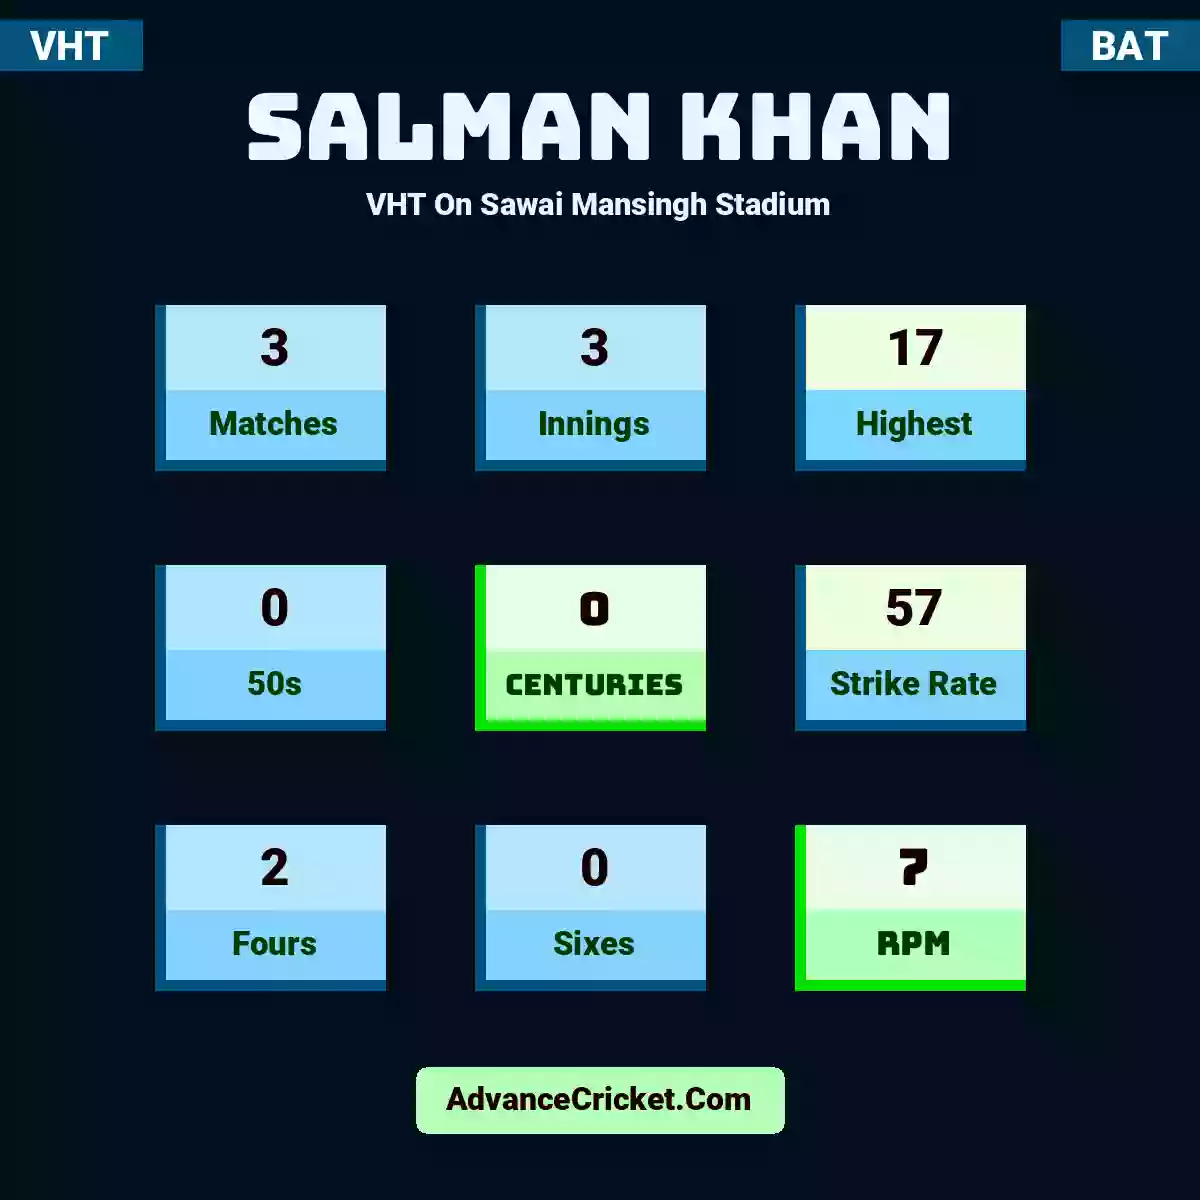 Salman Khan VHT  On Sawai Mansingh Stadium, Salman Khan played 3 matches, scored 17 runs as highest, 0 half-centuries, and 0 centuries, with a strike rate of 57. S.Khan hit 2 fours and 0 sixes, with an RPM of 7.